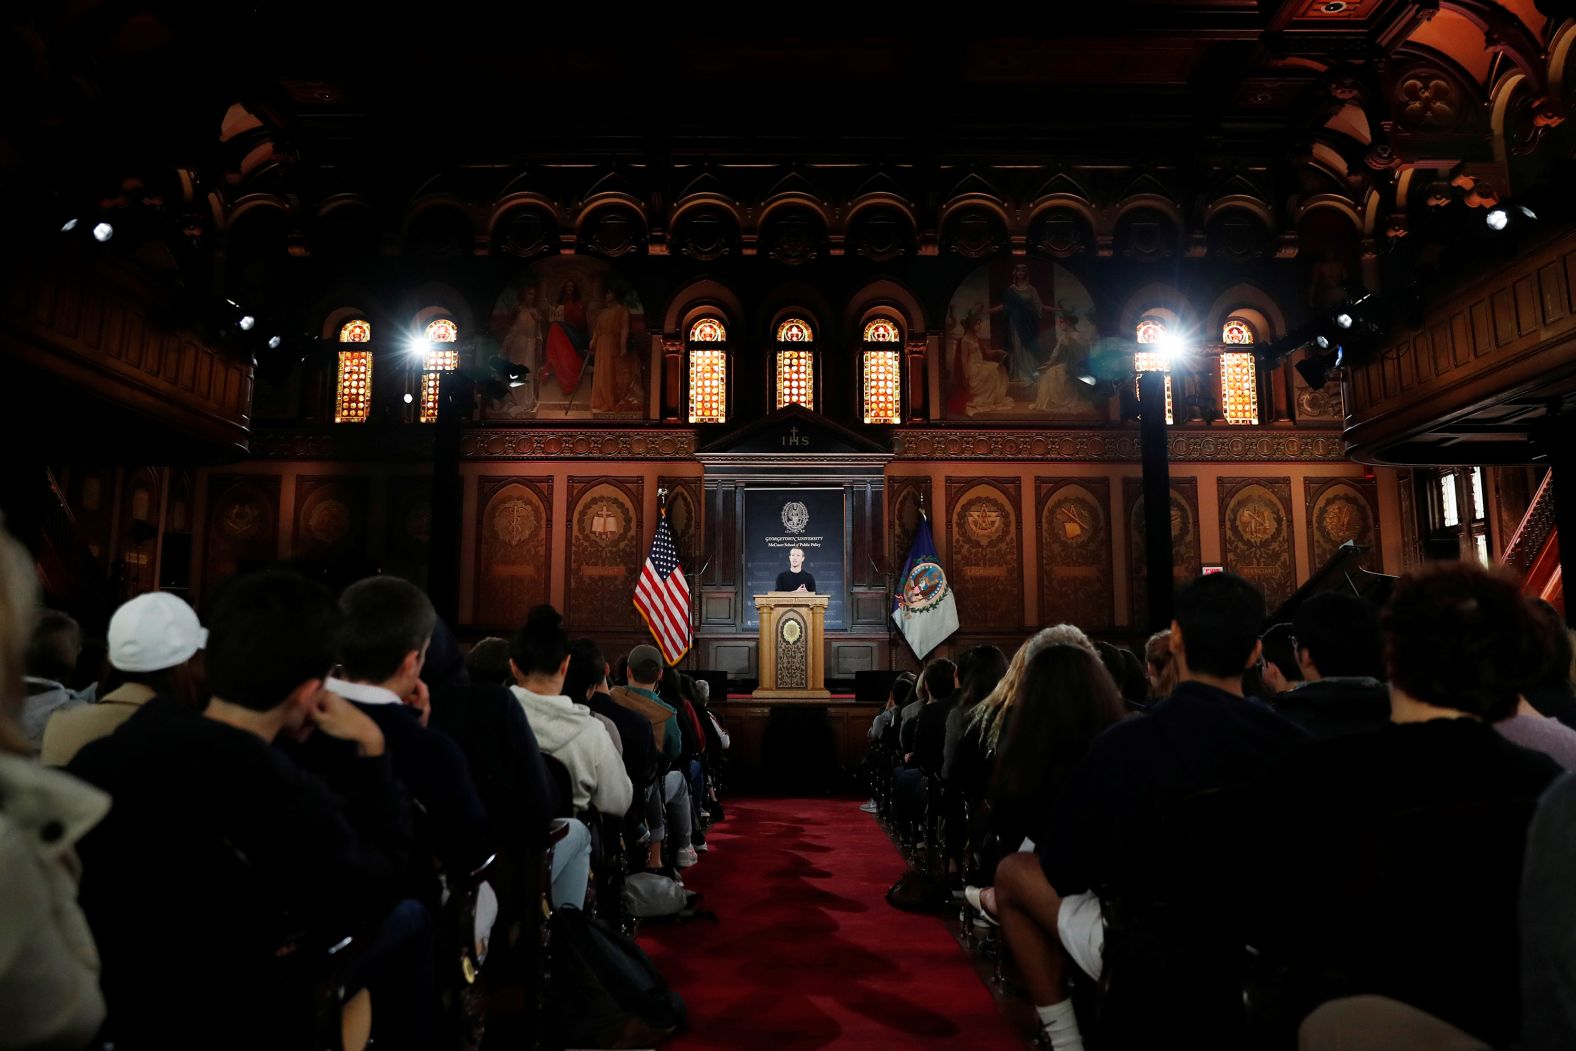 Zuckerberg addresses an audience in October 2019 during a forum about free speech and combating hate speech and misinformation. The forum was hosted by Georgetown University in Washington, DC.